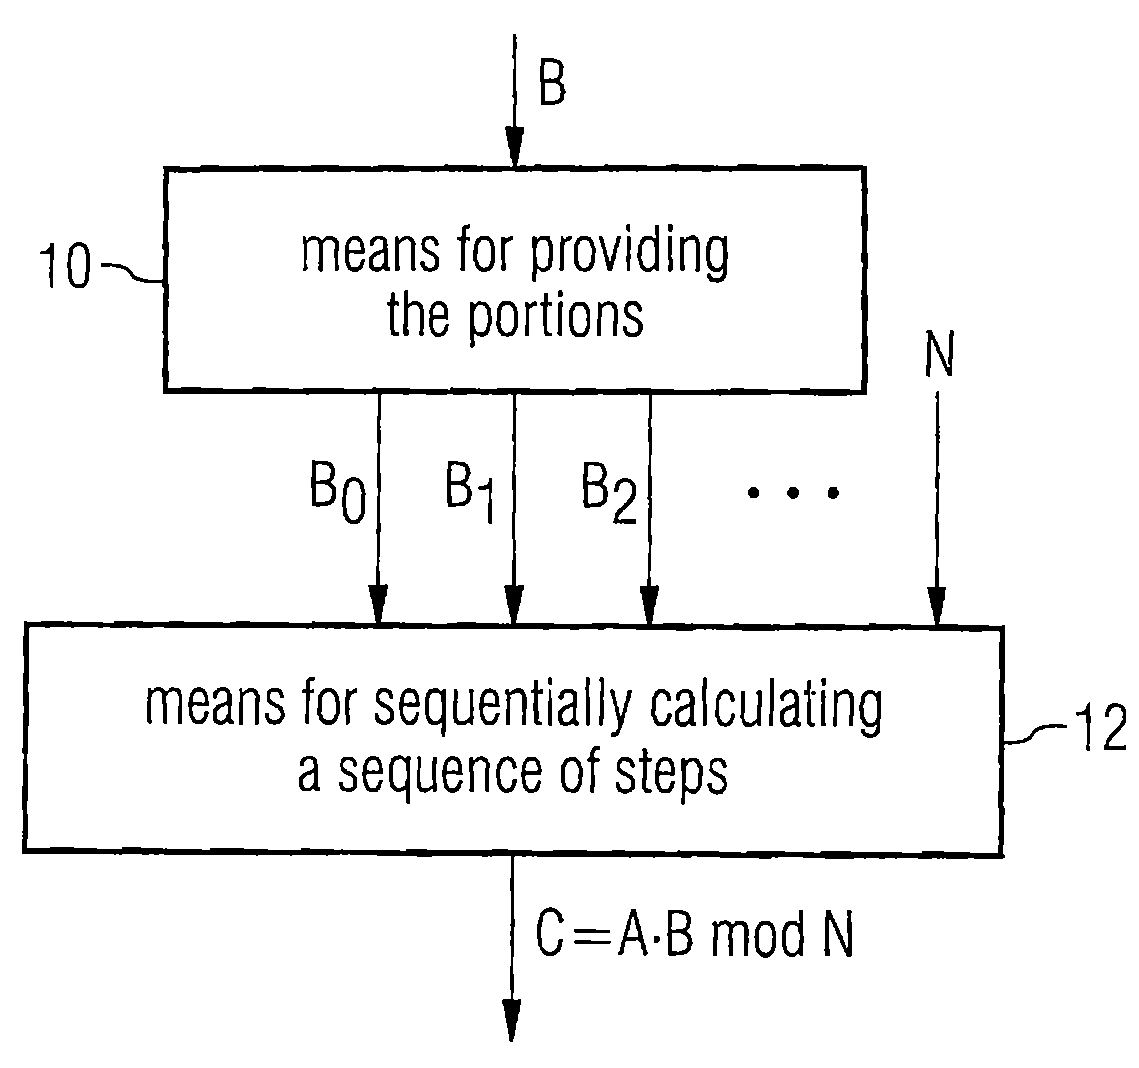 Calculating unit for reducing an input number with respect to a modulus